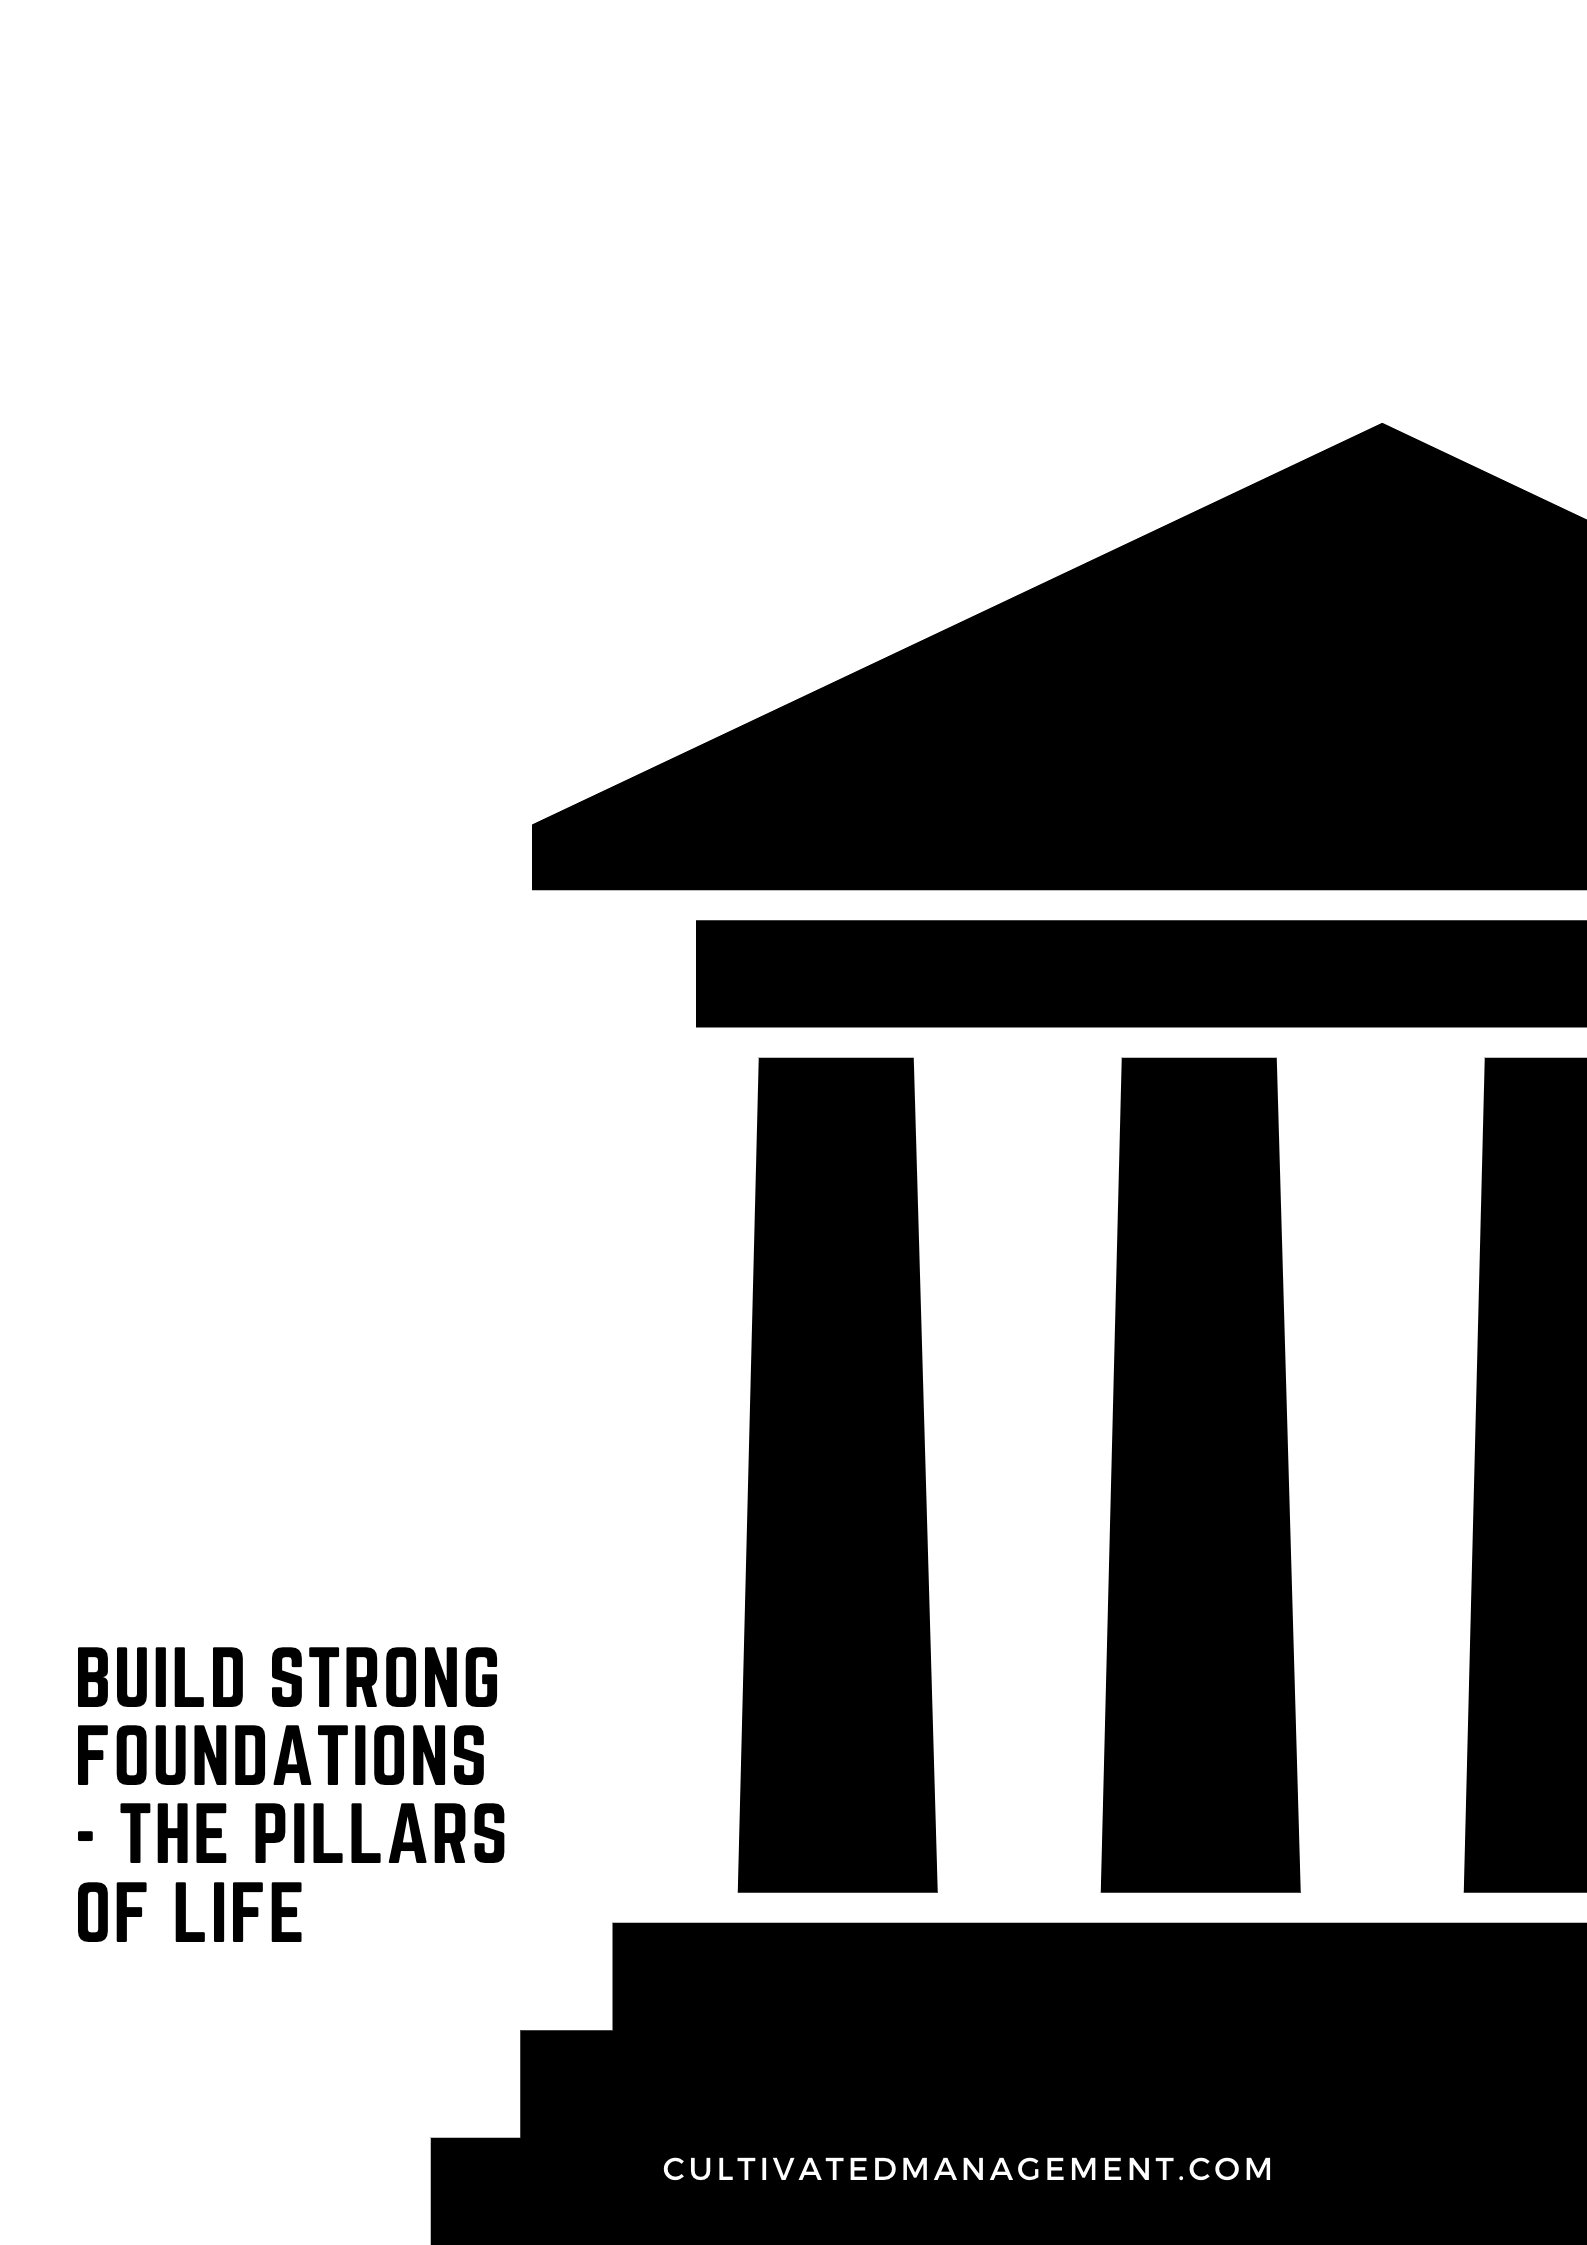 The 6 pillars of life - build strong personal foundations